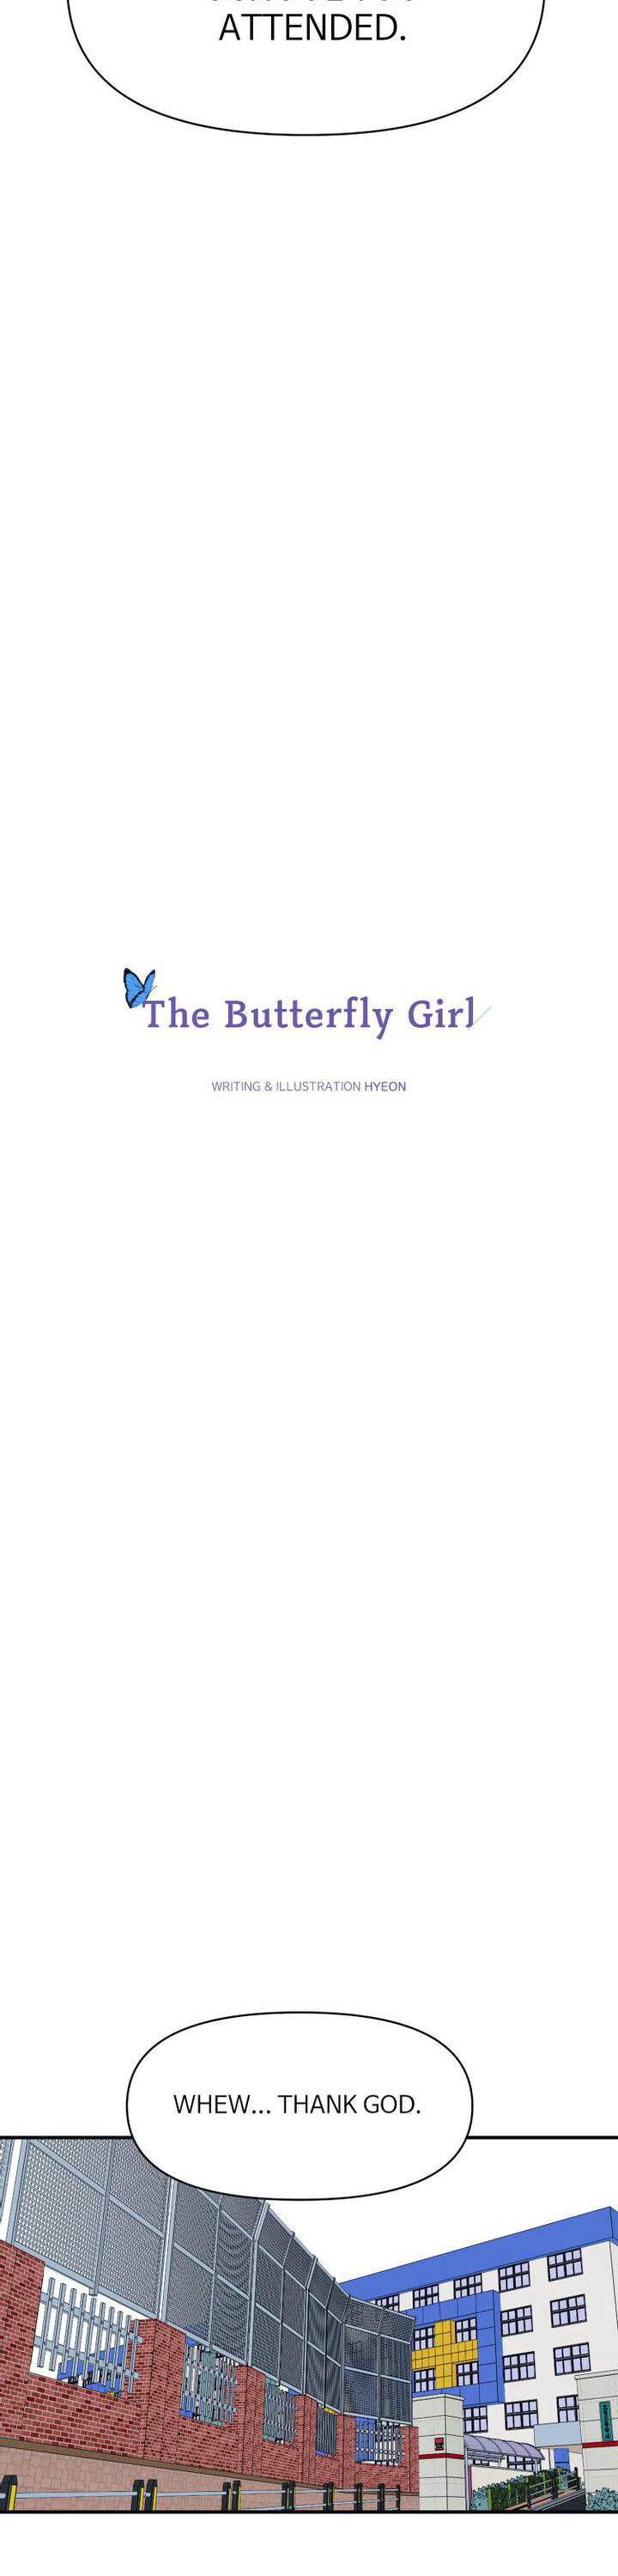 The Butterfly Girl - Page 2